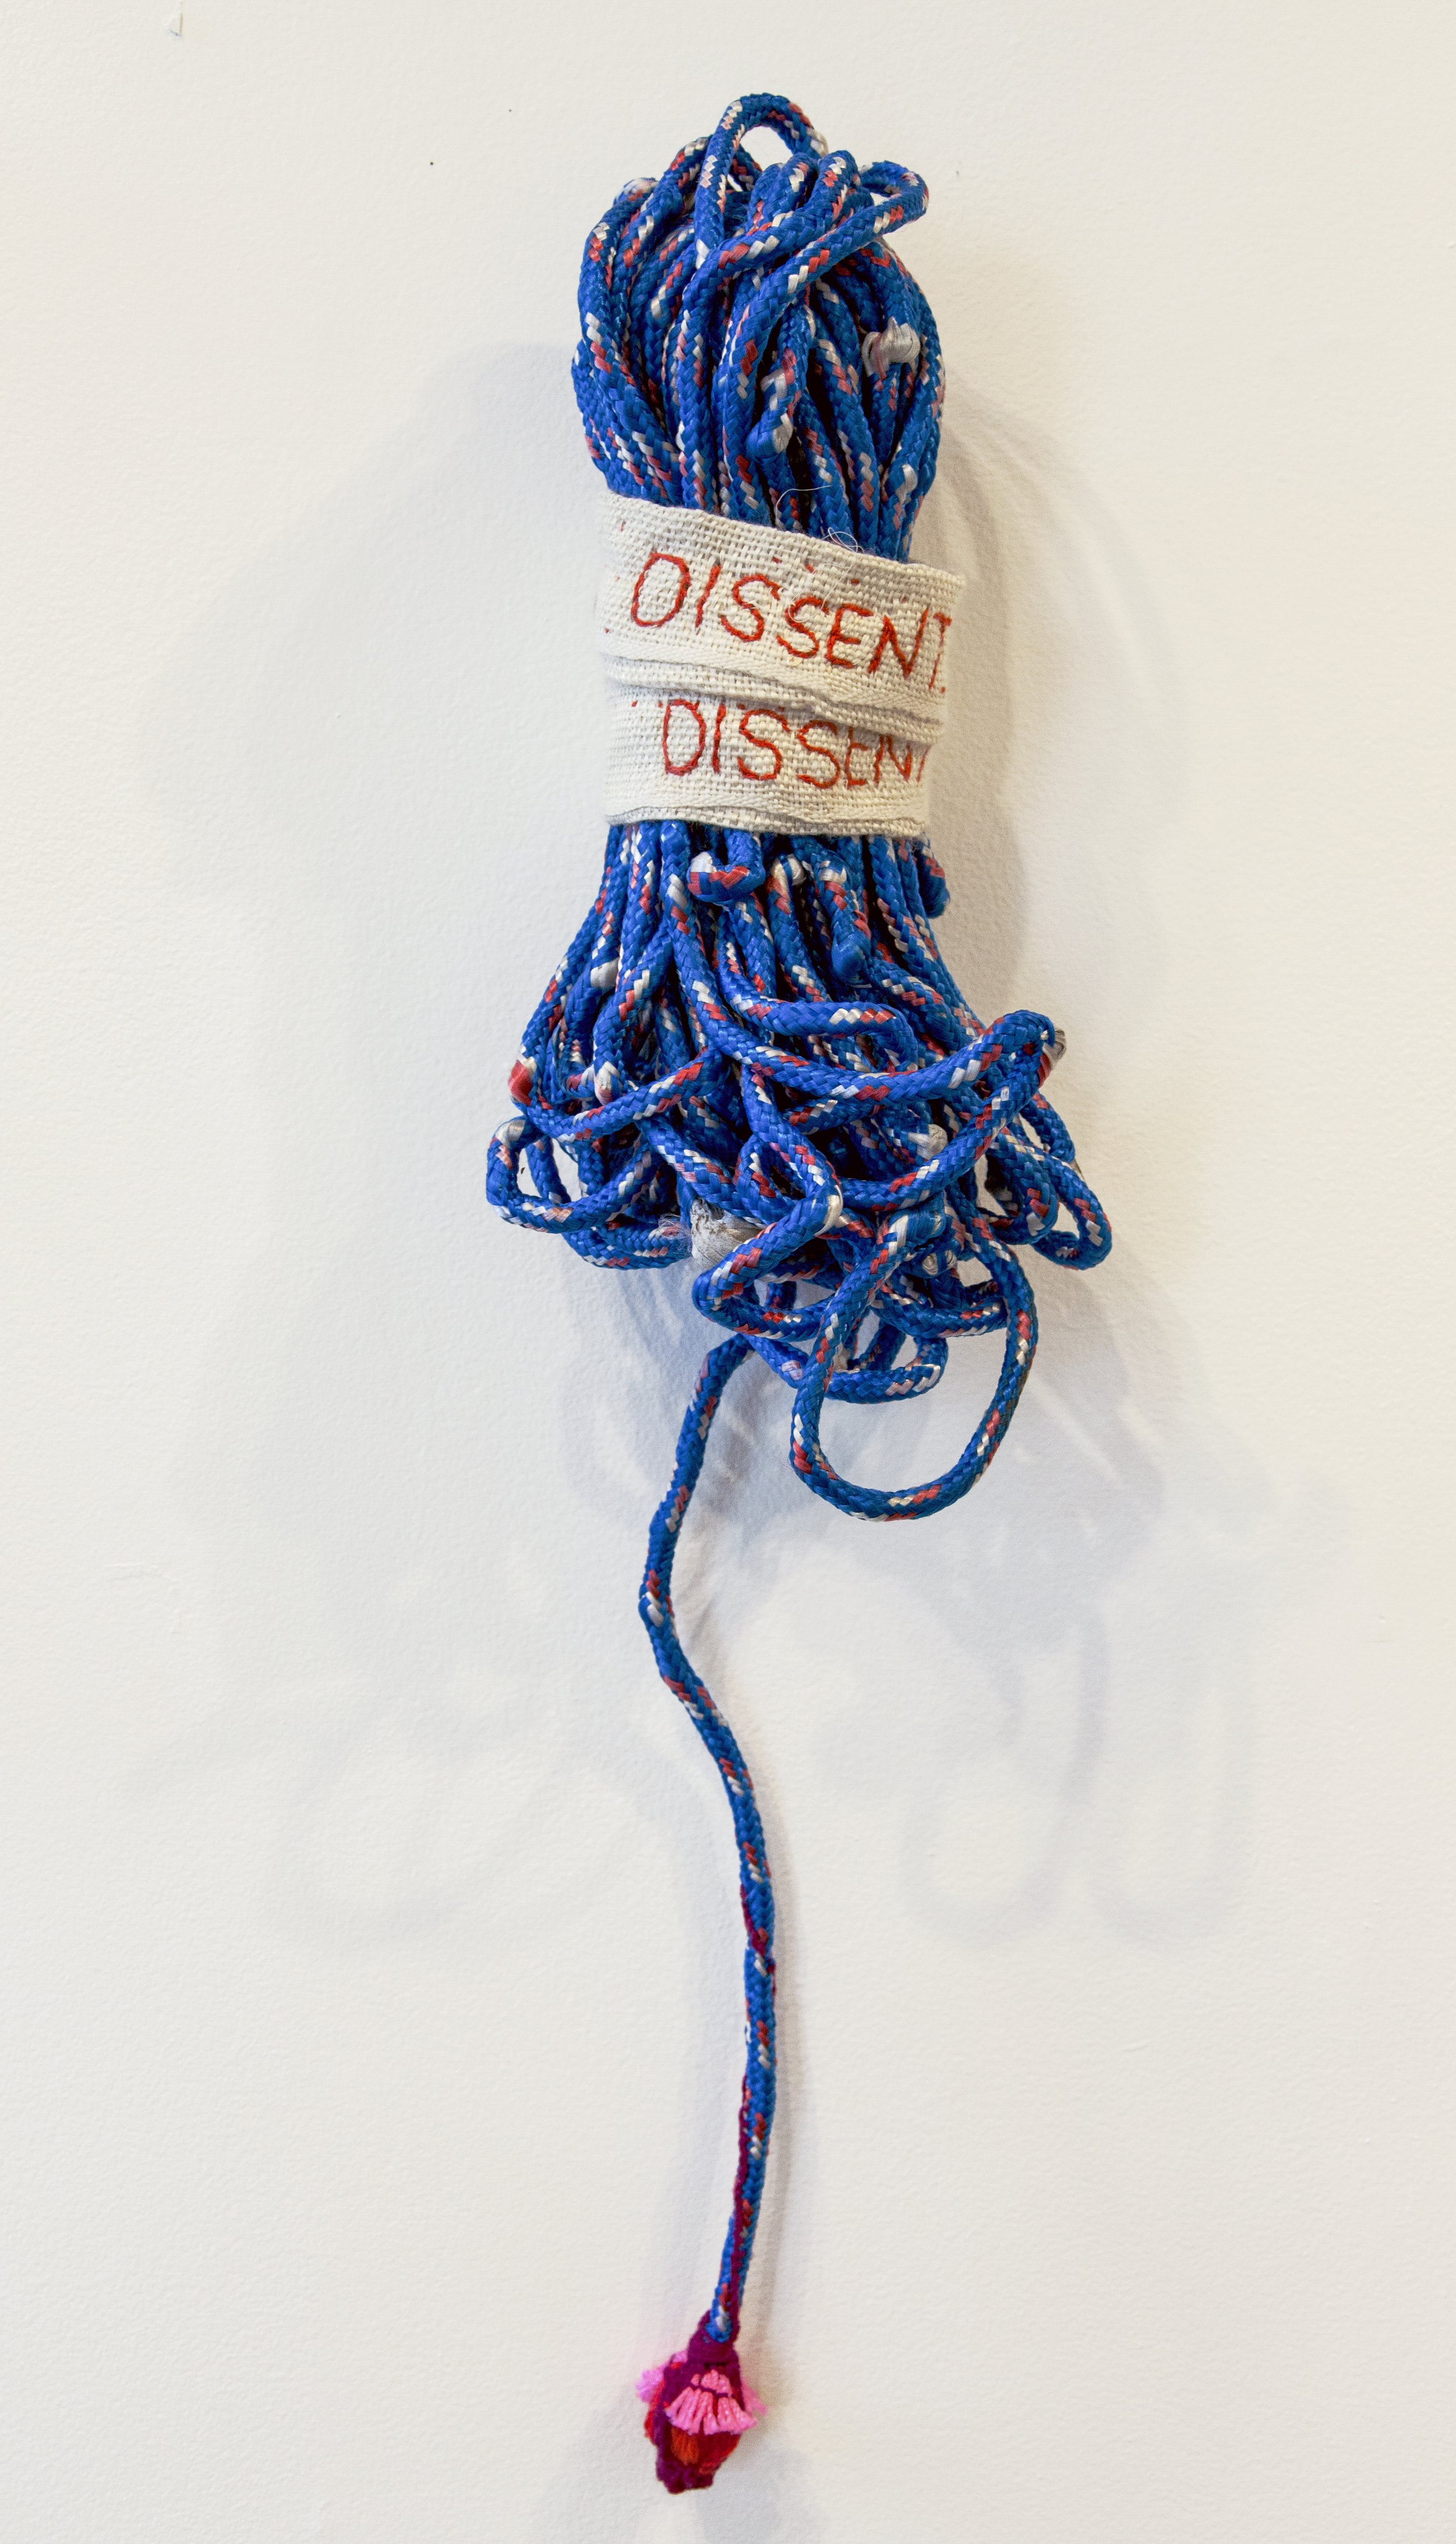 Dissent Collars #13 and #14 (on rope)